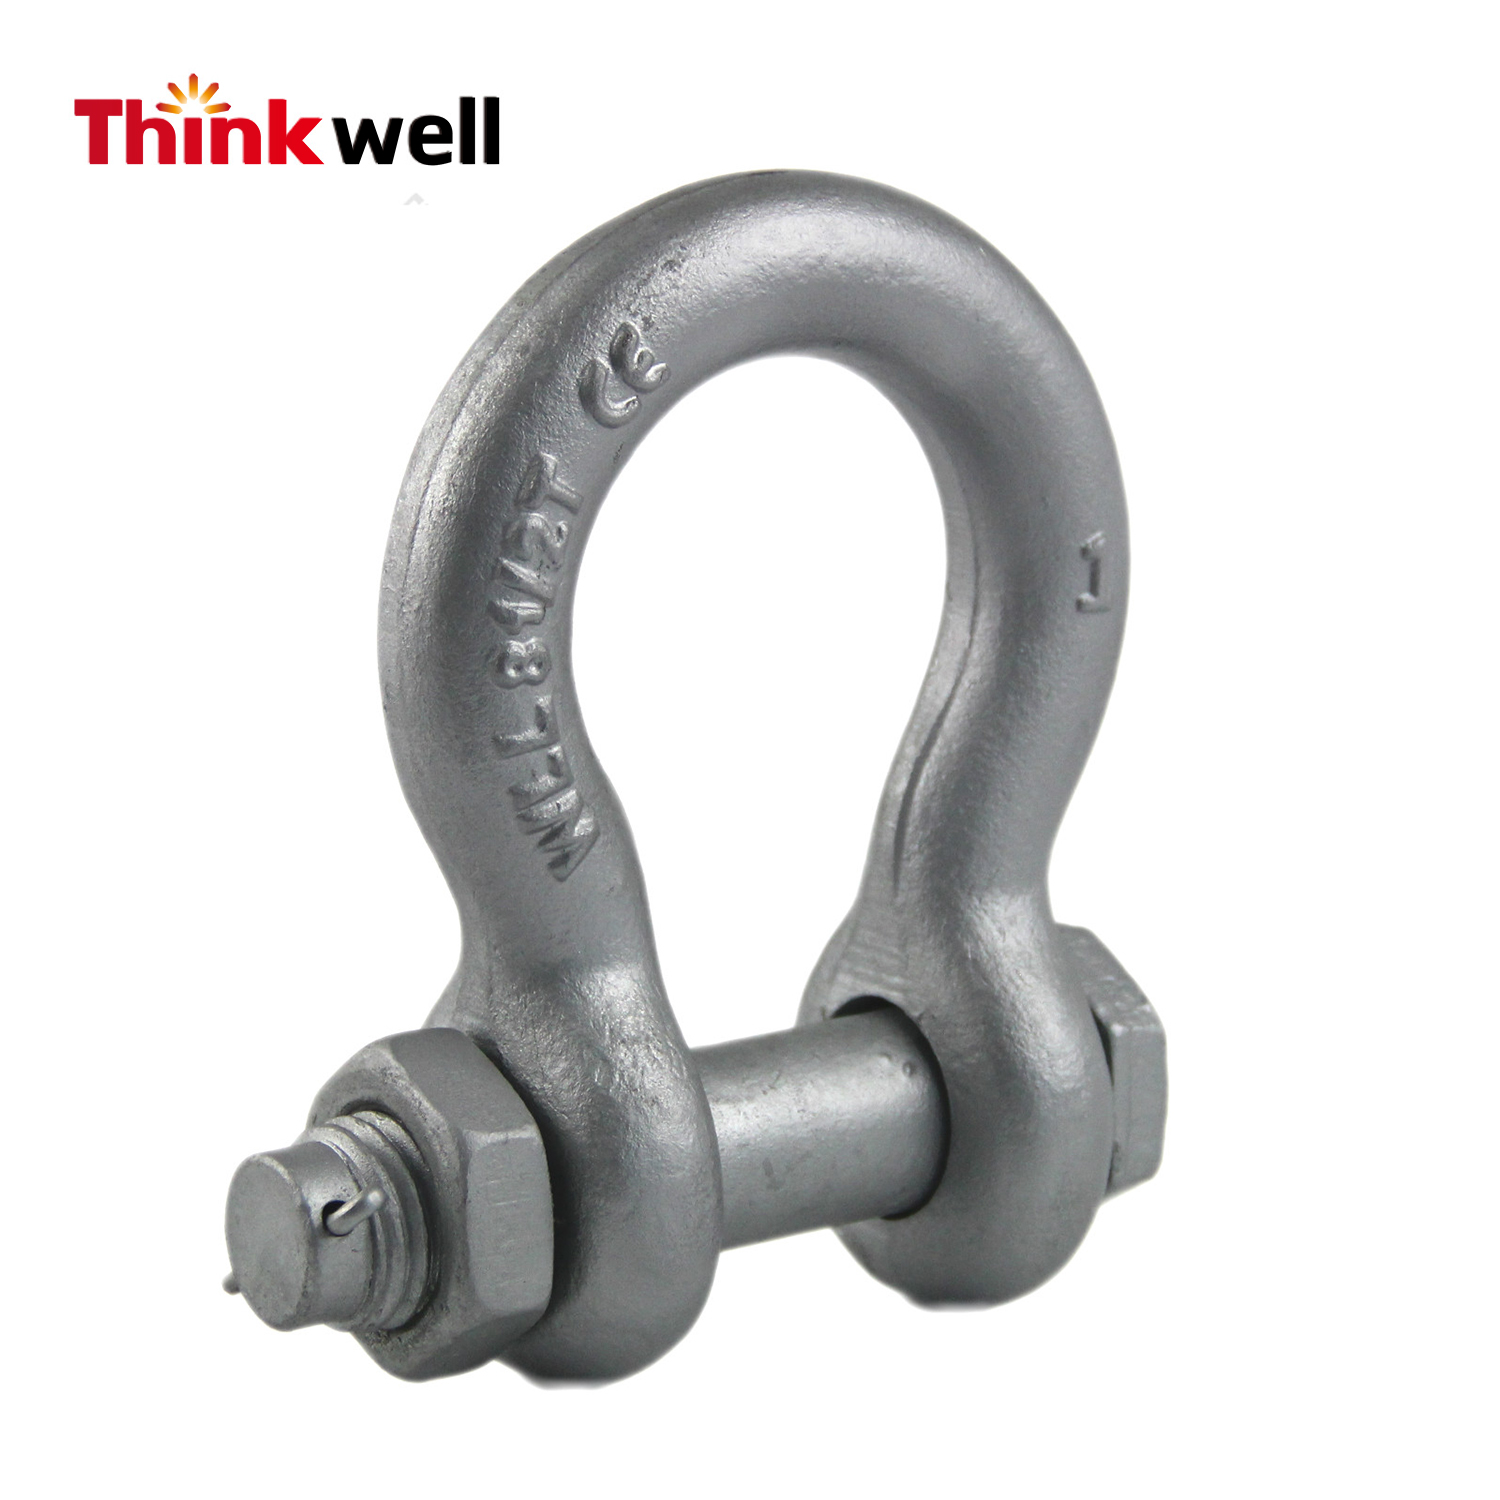 Thinkwell US Type G2130 Manille d'ancrage de type boulon 